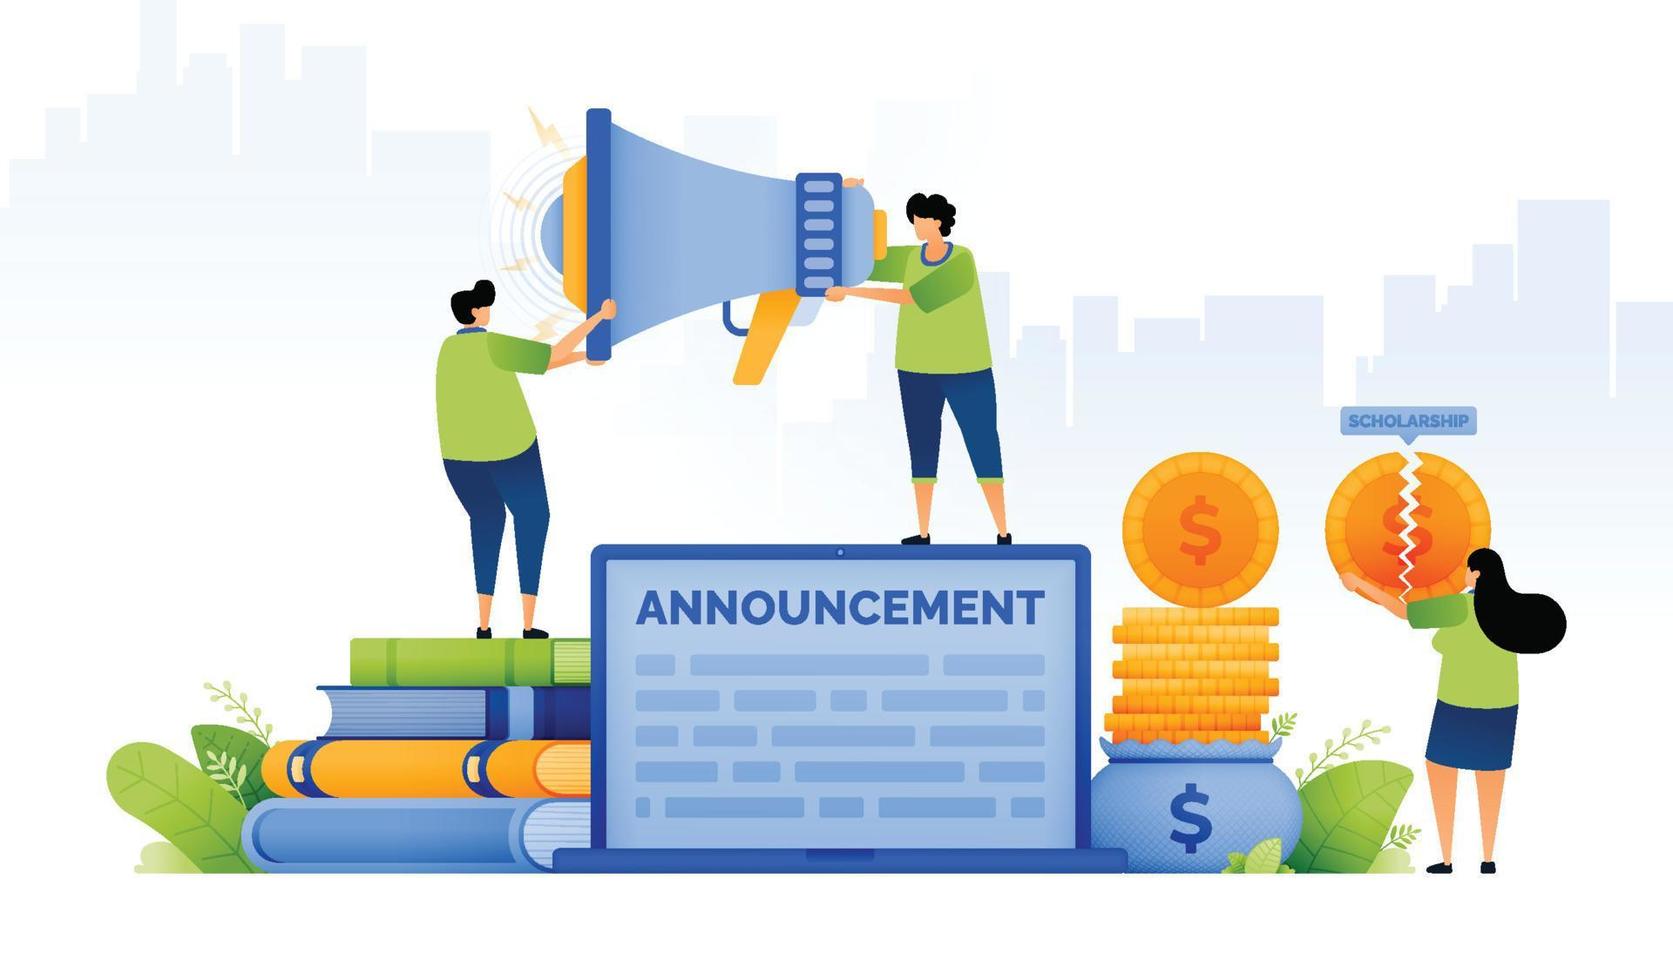 design illustration of tuition reduction announcement with merit educational scholarship program. students holding megaphones and broken coins. can be used for web, website, posters, apps, brochures vector